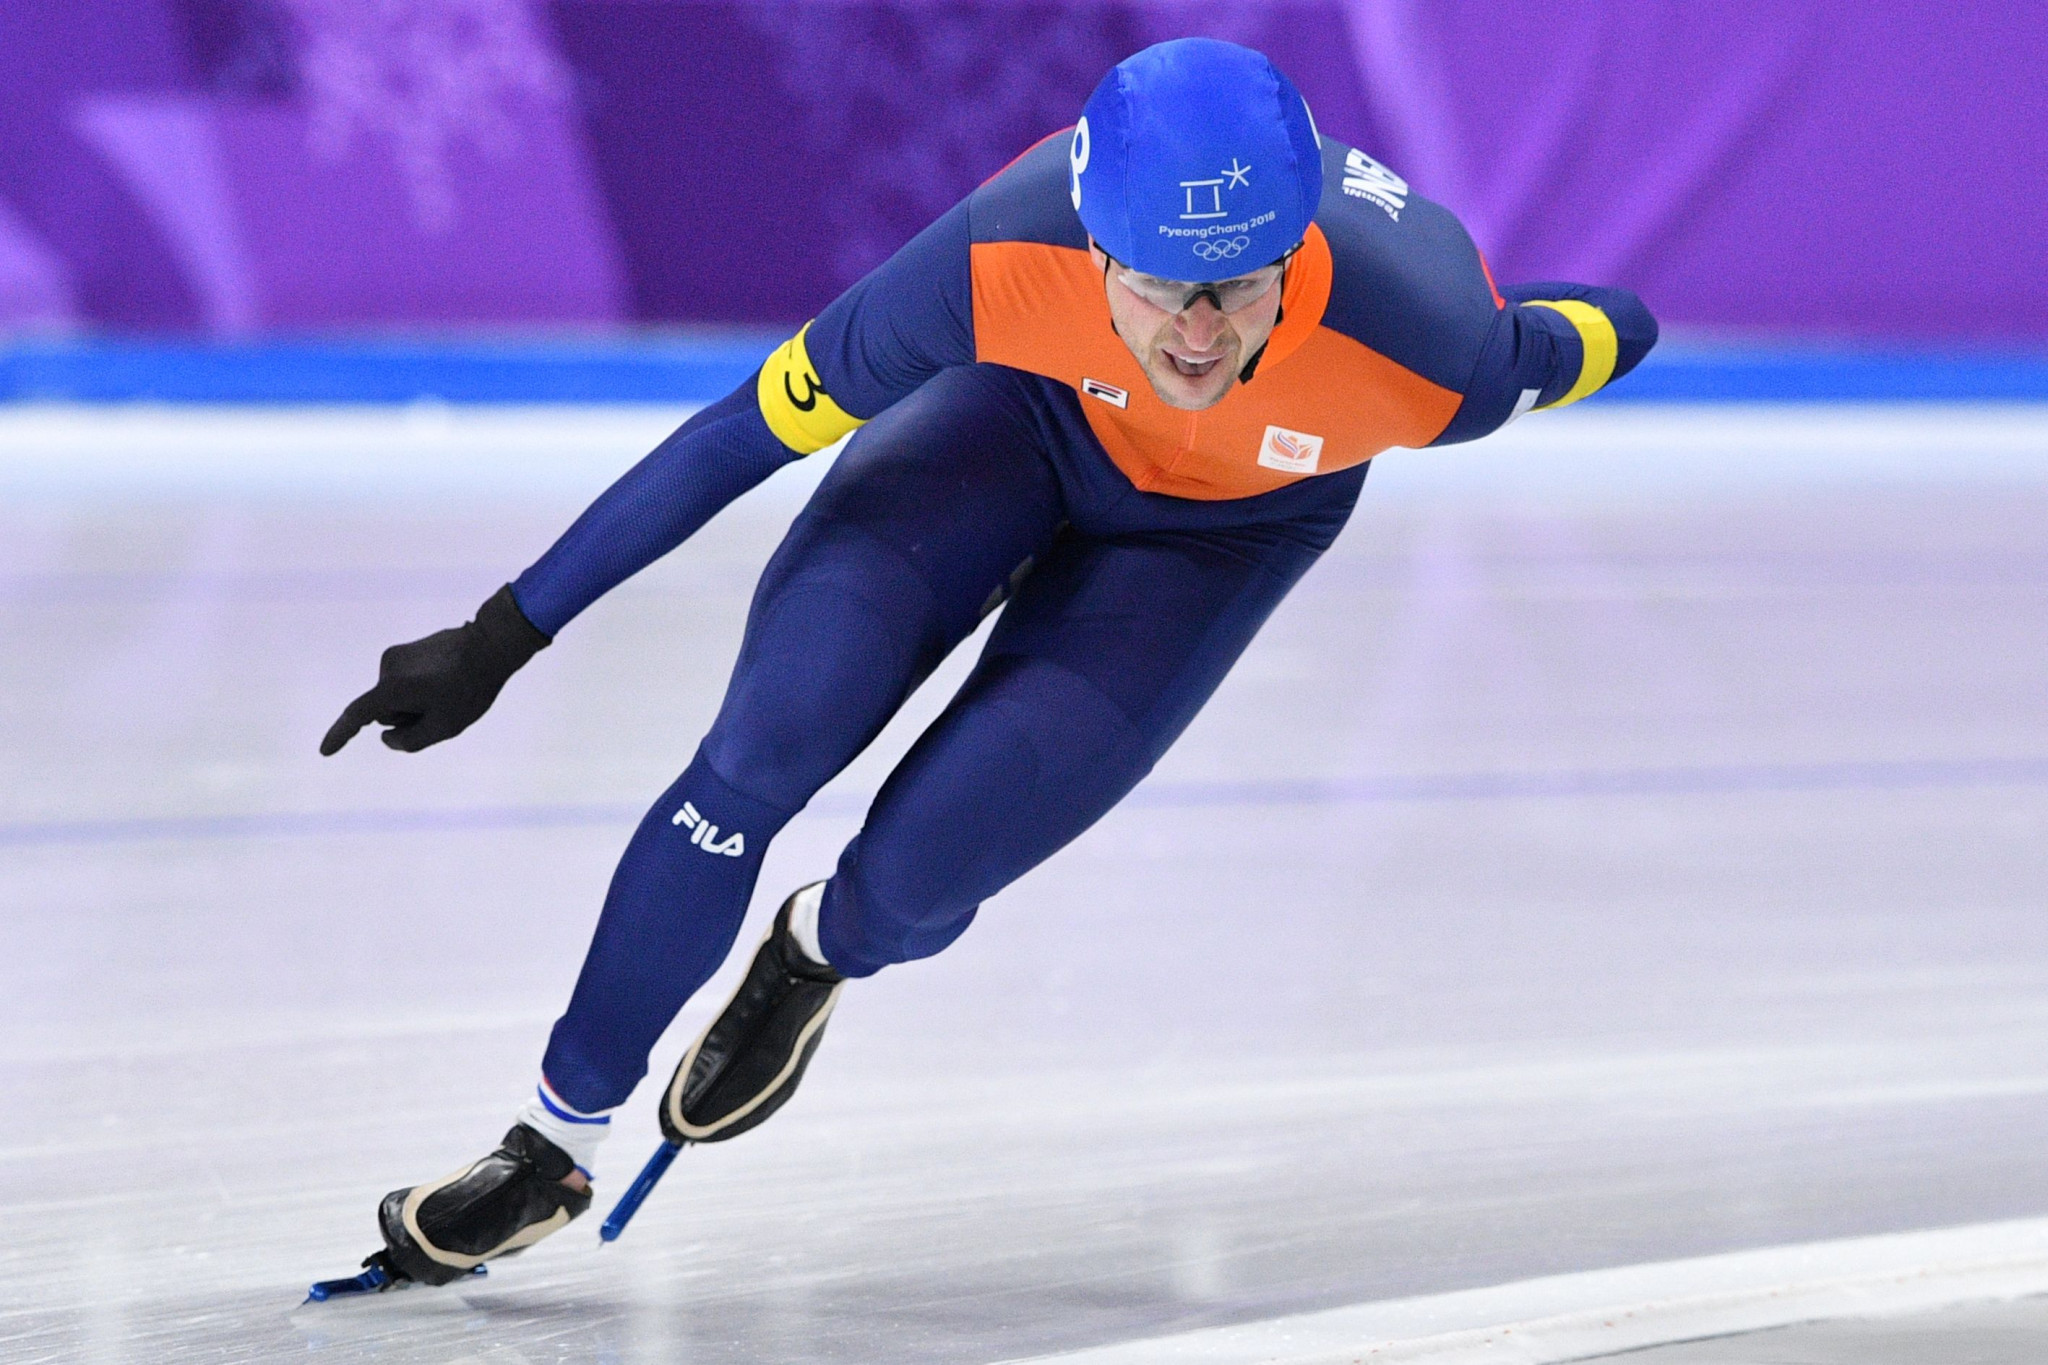 Sven Kramer of The Netherlands won his tenth European allround title at the ISU European Speed Skating Championships in Collabo ©Getty Images